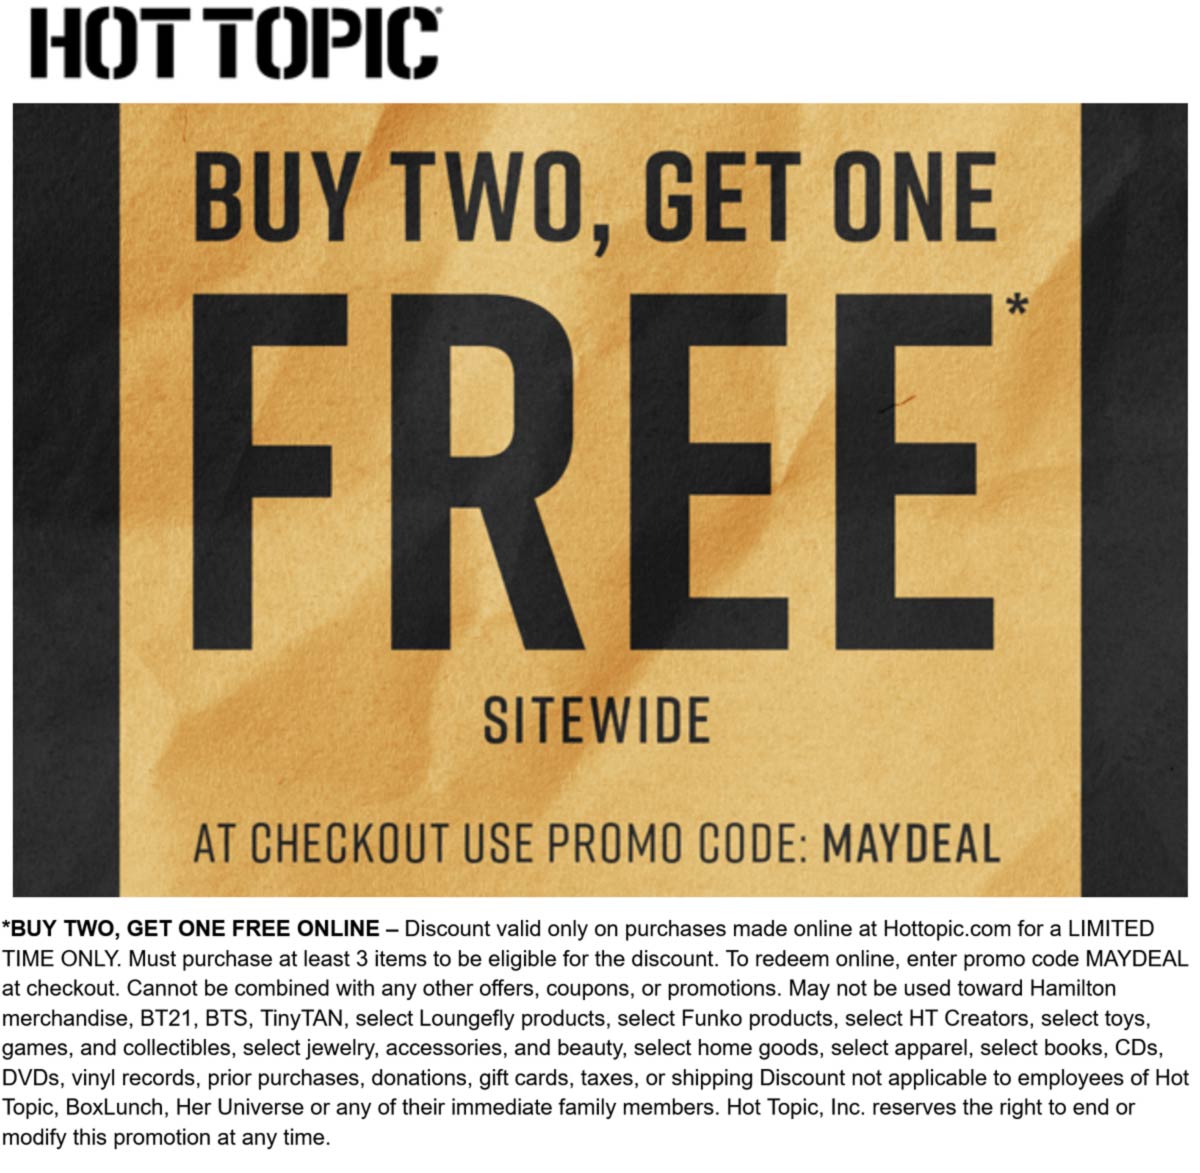 Hot Topic stores Coupon  3rd item free today at Hot Topic via promo code MAYDEAL #hottopic 